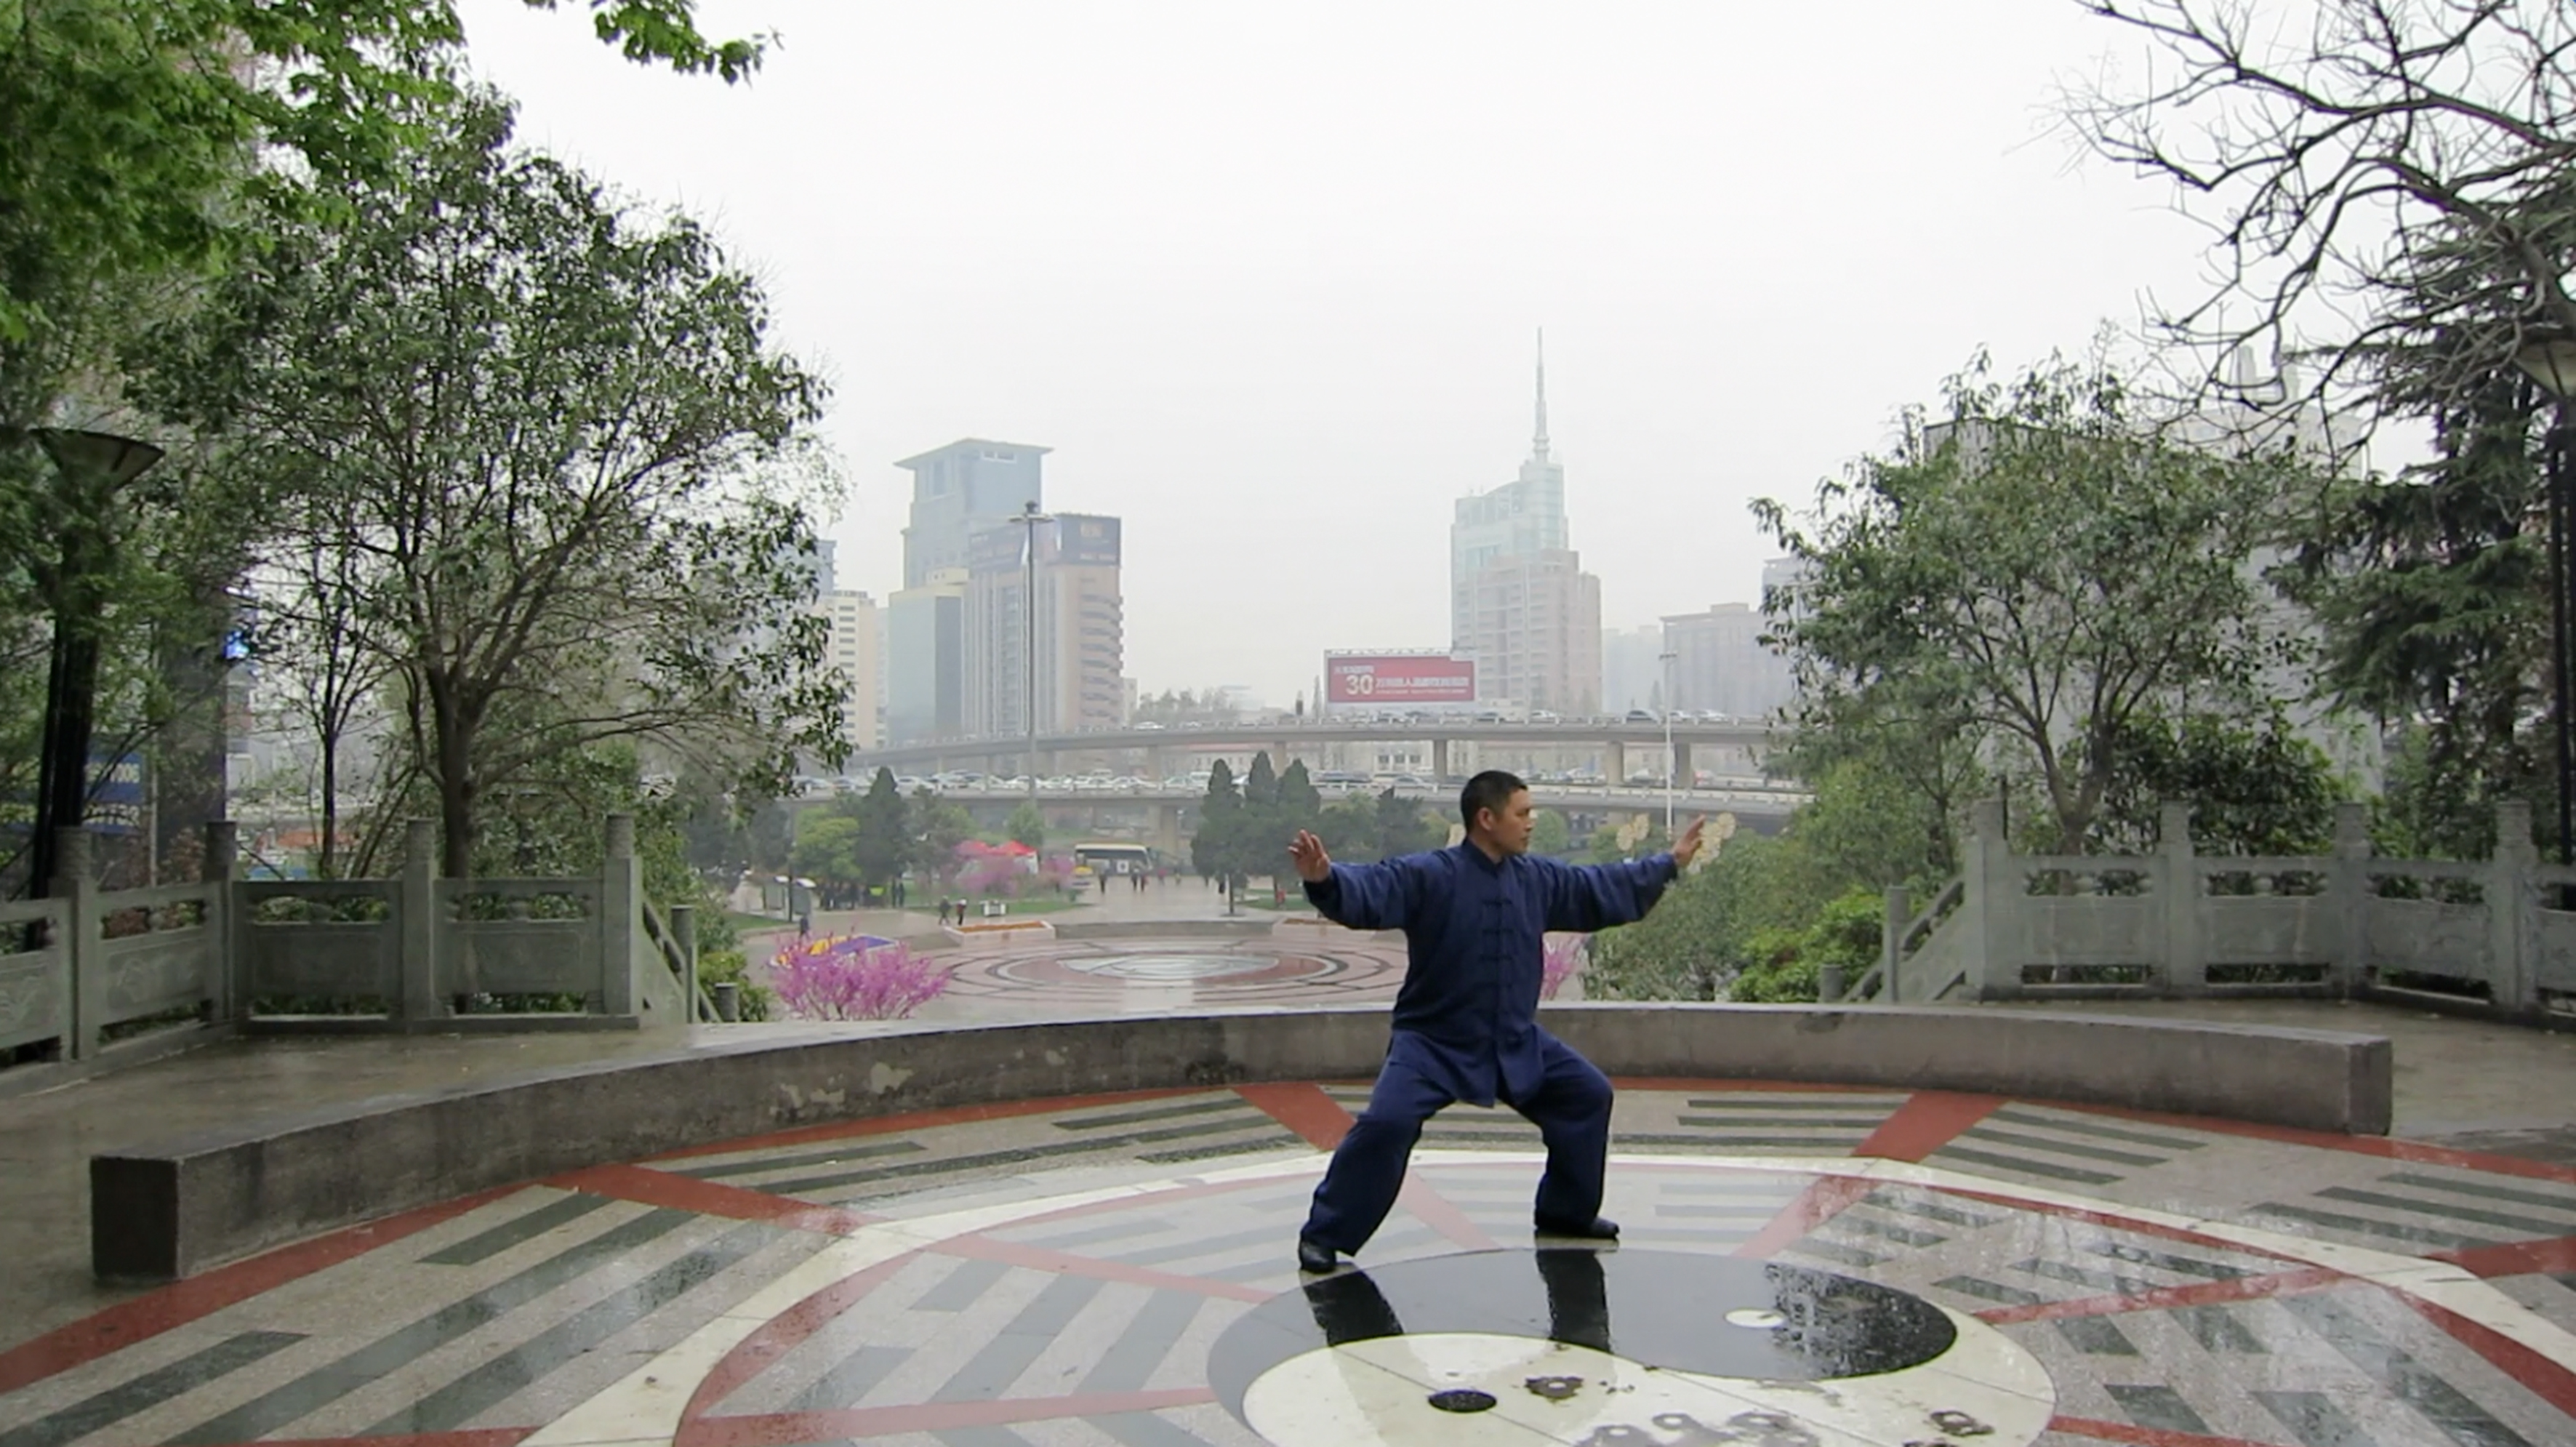 Shifu Liu practices on a wet morning in China